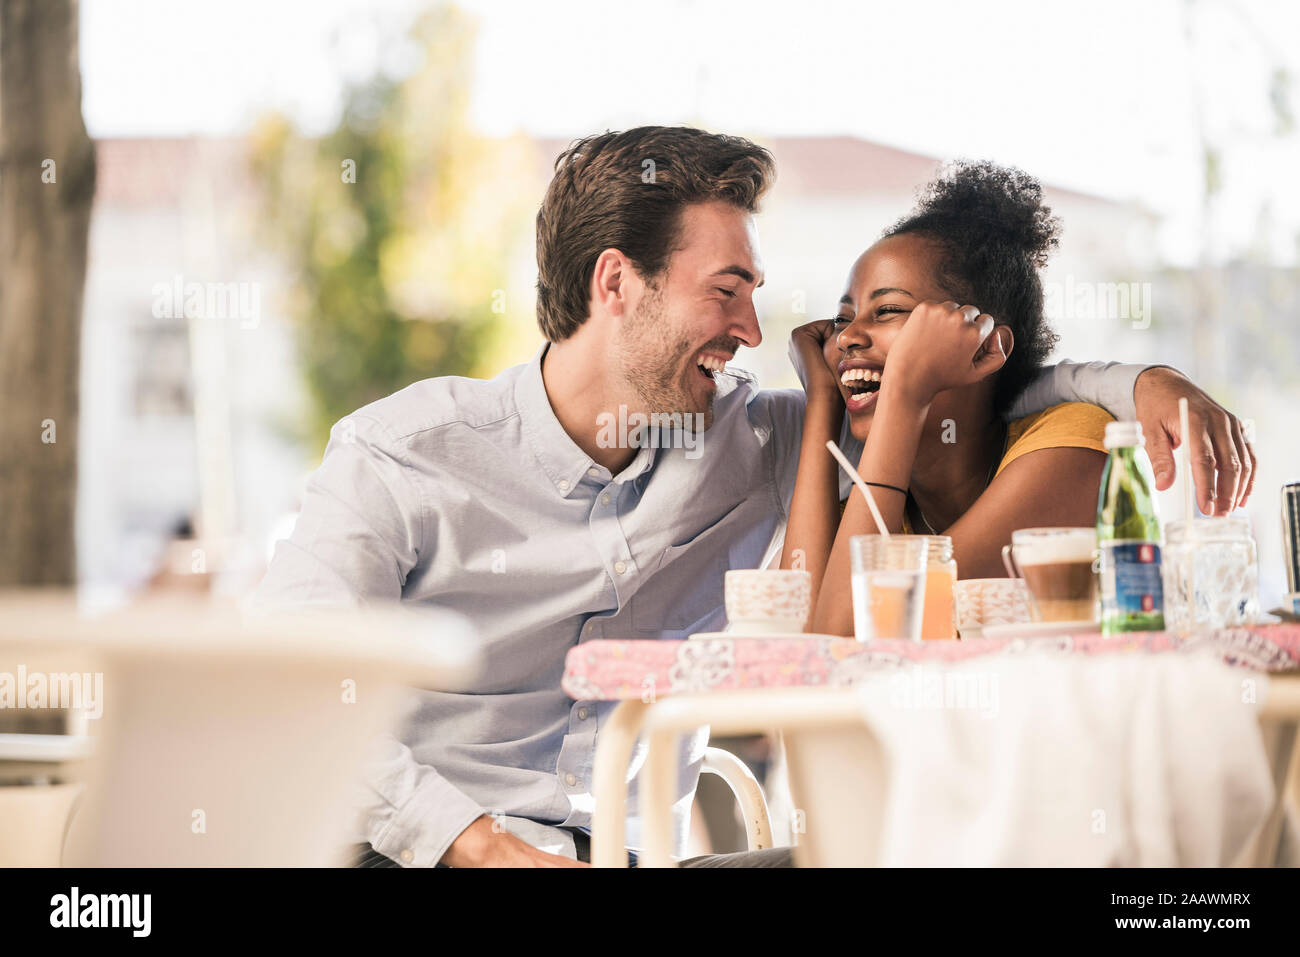 Laughing young couple at an outdoor cafe Stock Photo